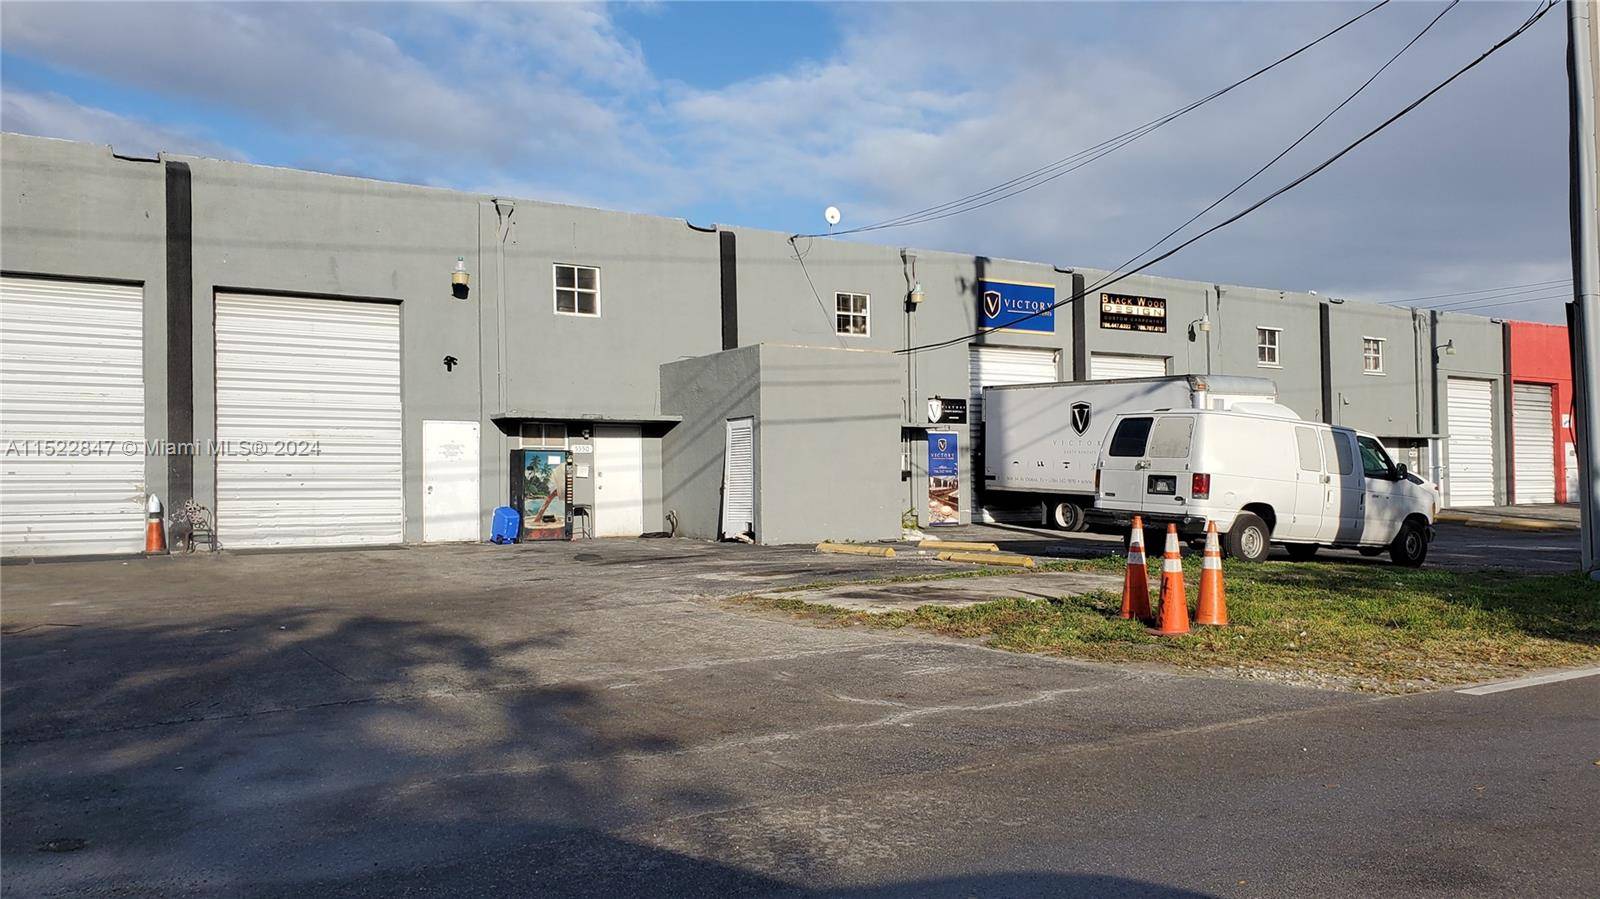 2000 SF WAREHOUSE WITH OFFICE 4, 500.